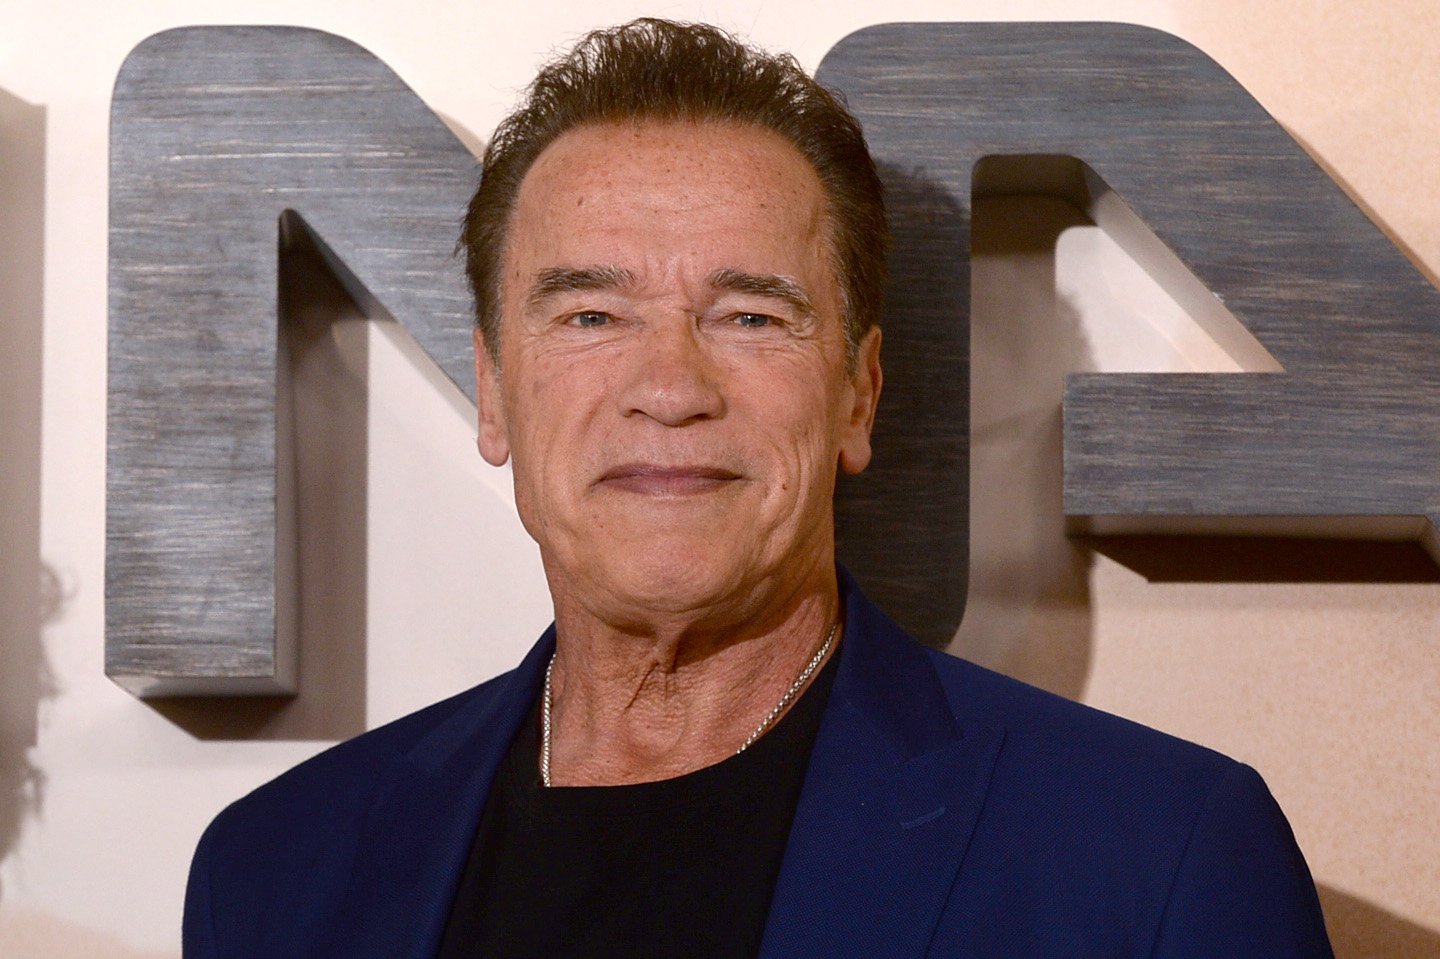 Arnold Schwarzenegger attends the "Terminator: Dark Fate" photocall on October 17, 2019 in London, England | Photo: Getty Images